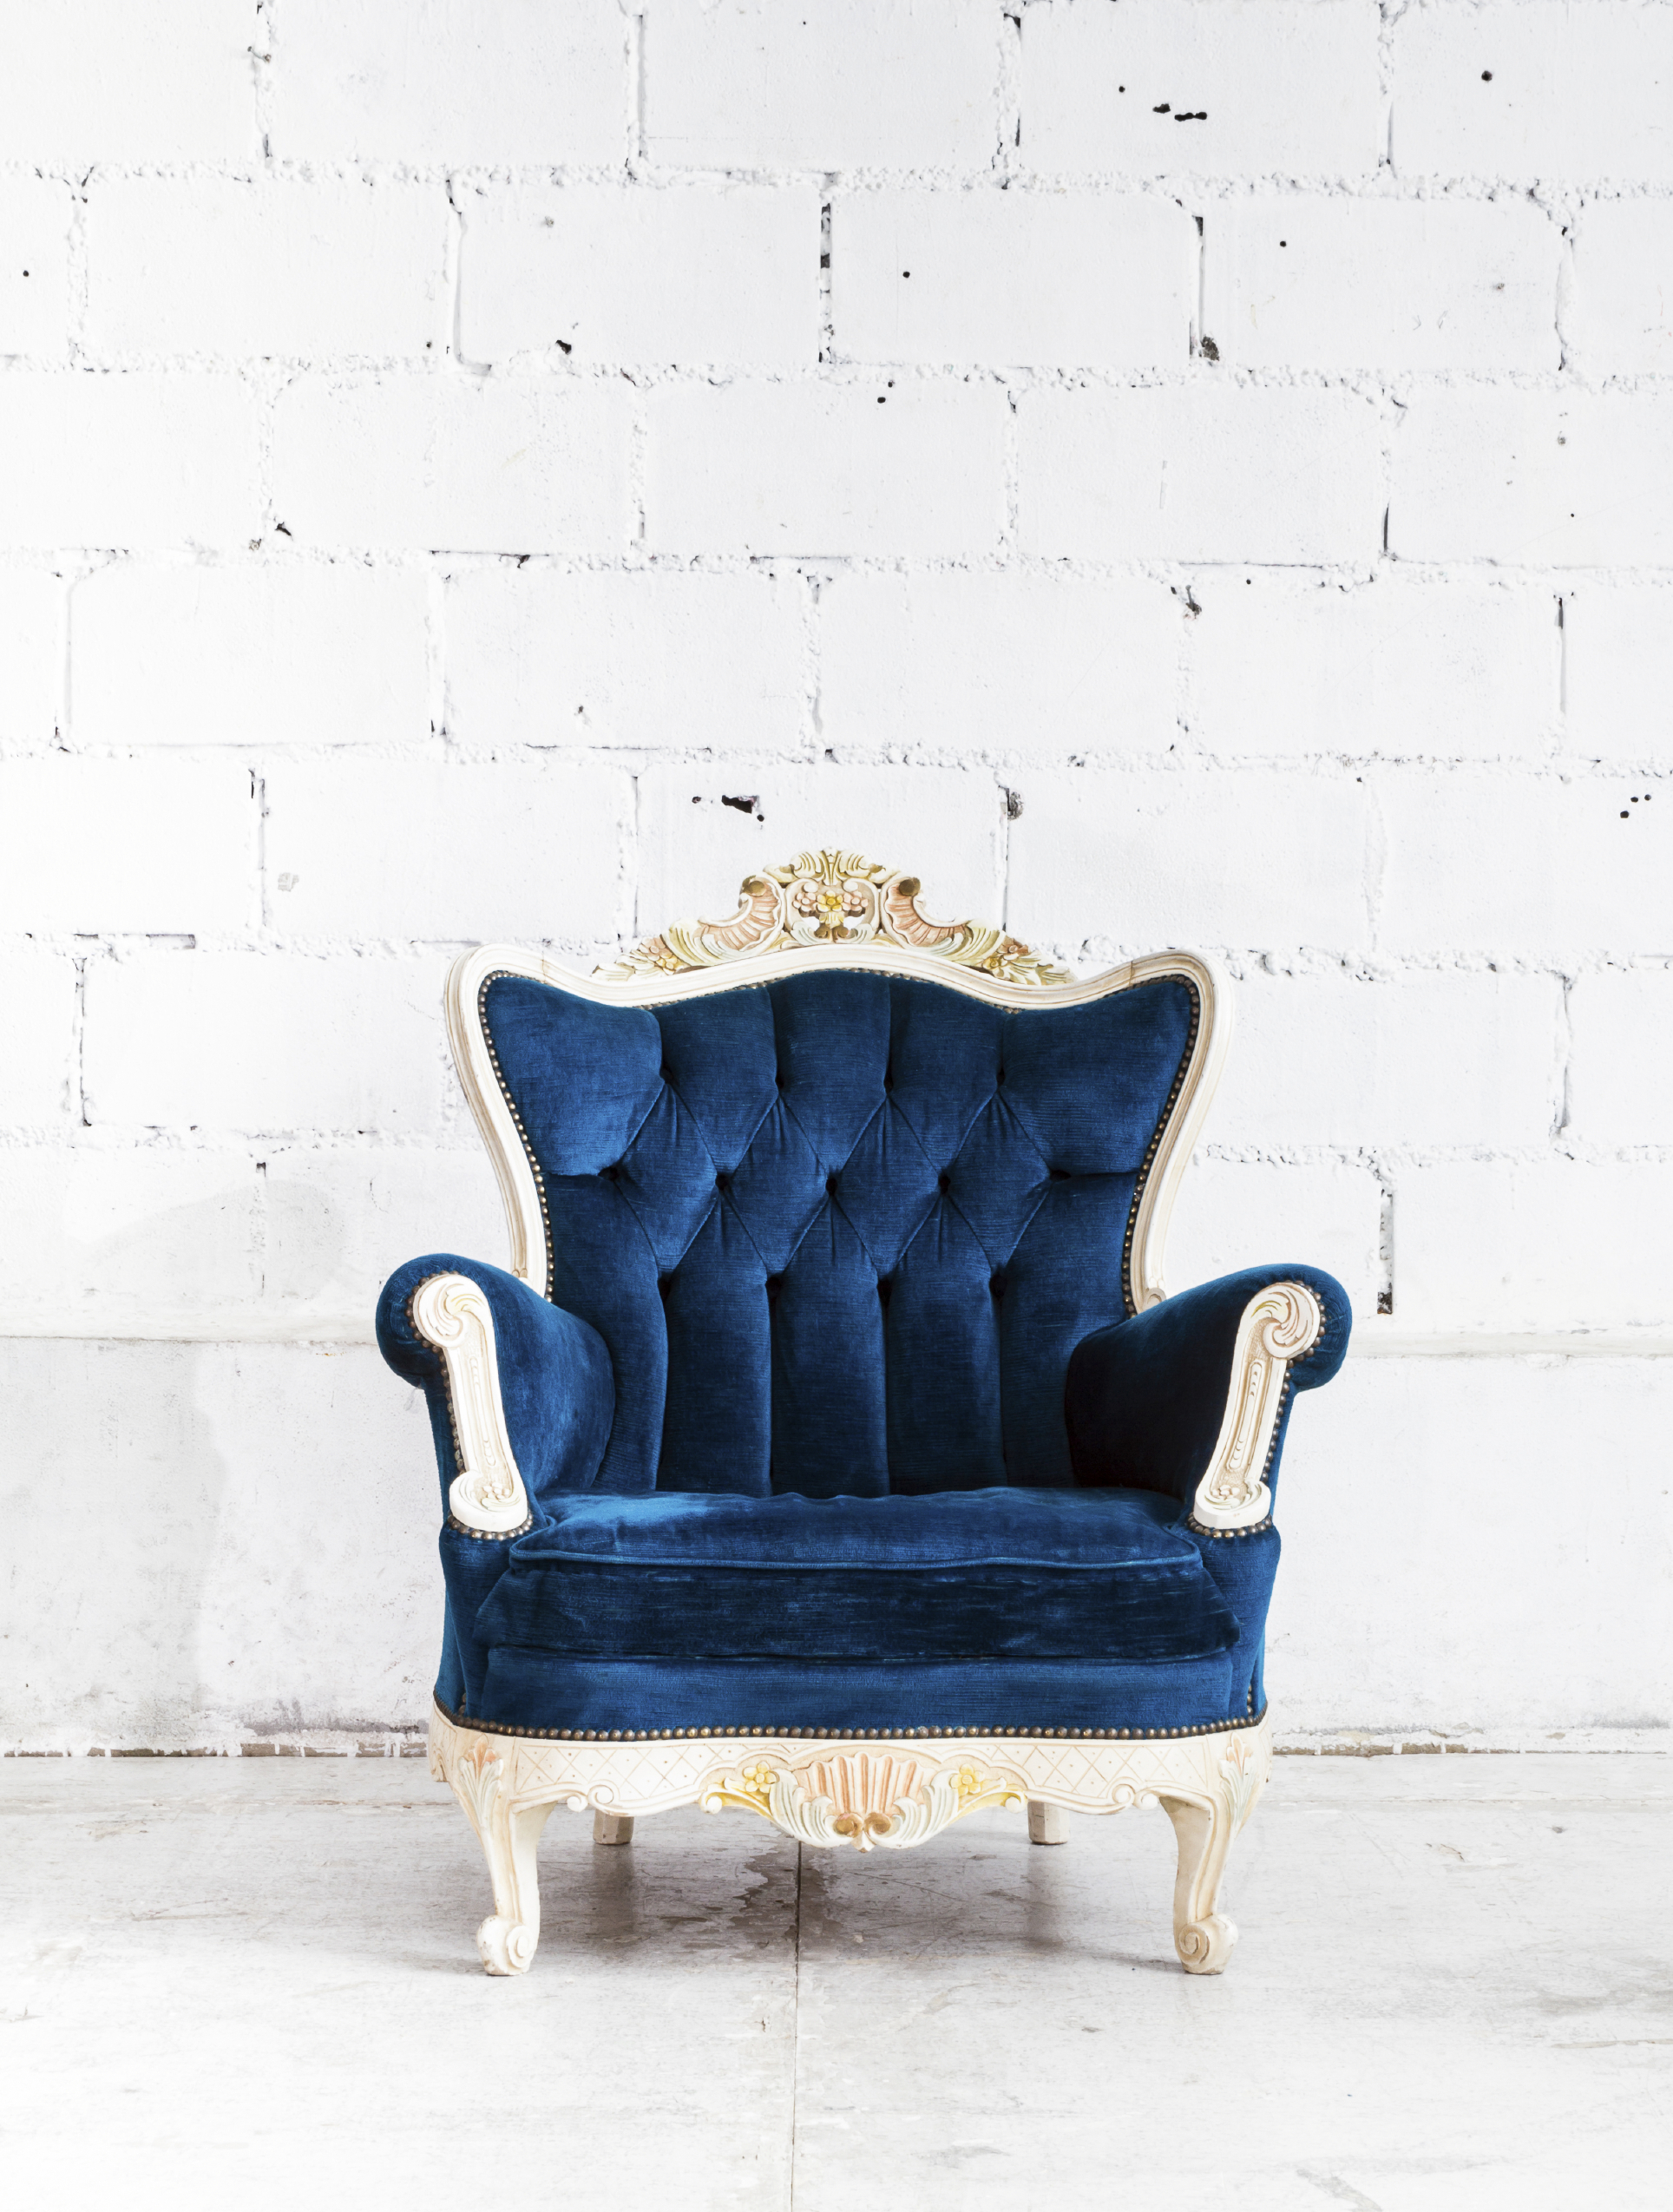 Blue classical style Armchair sofa couch in vintage room